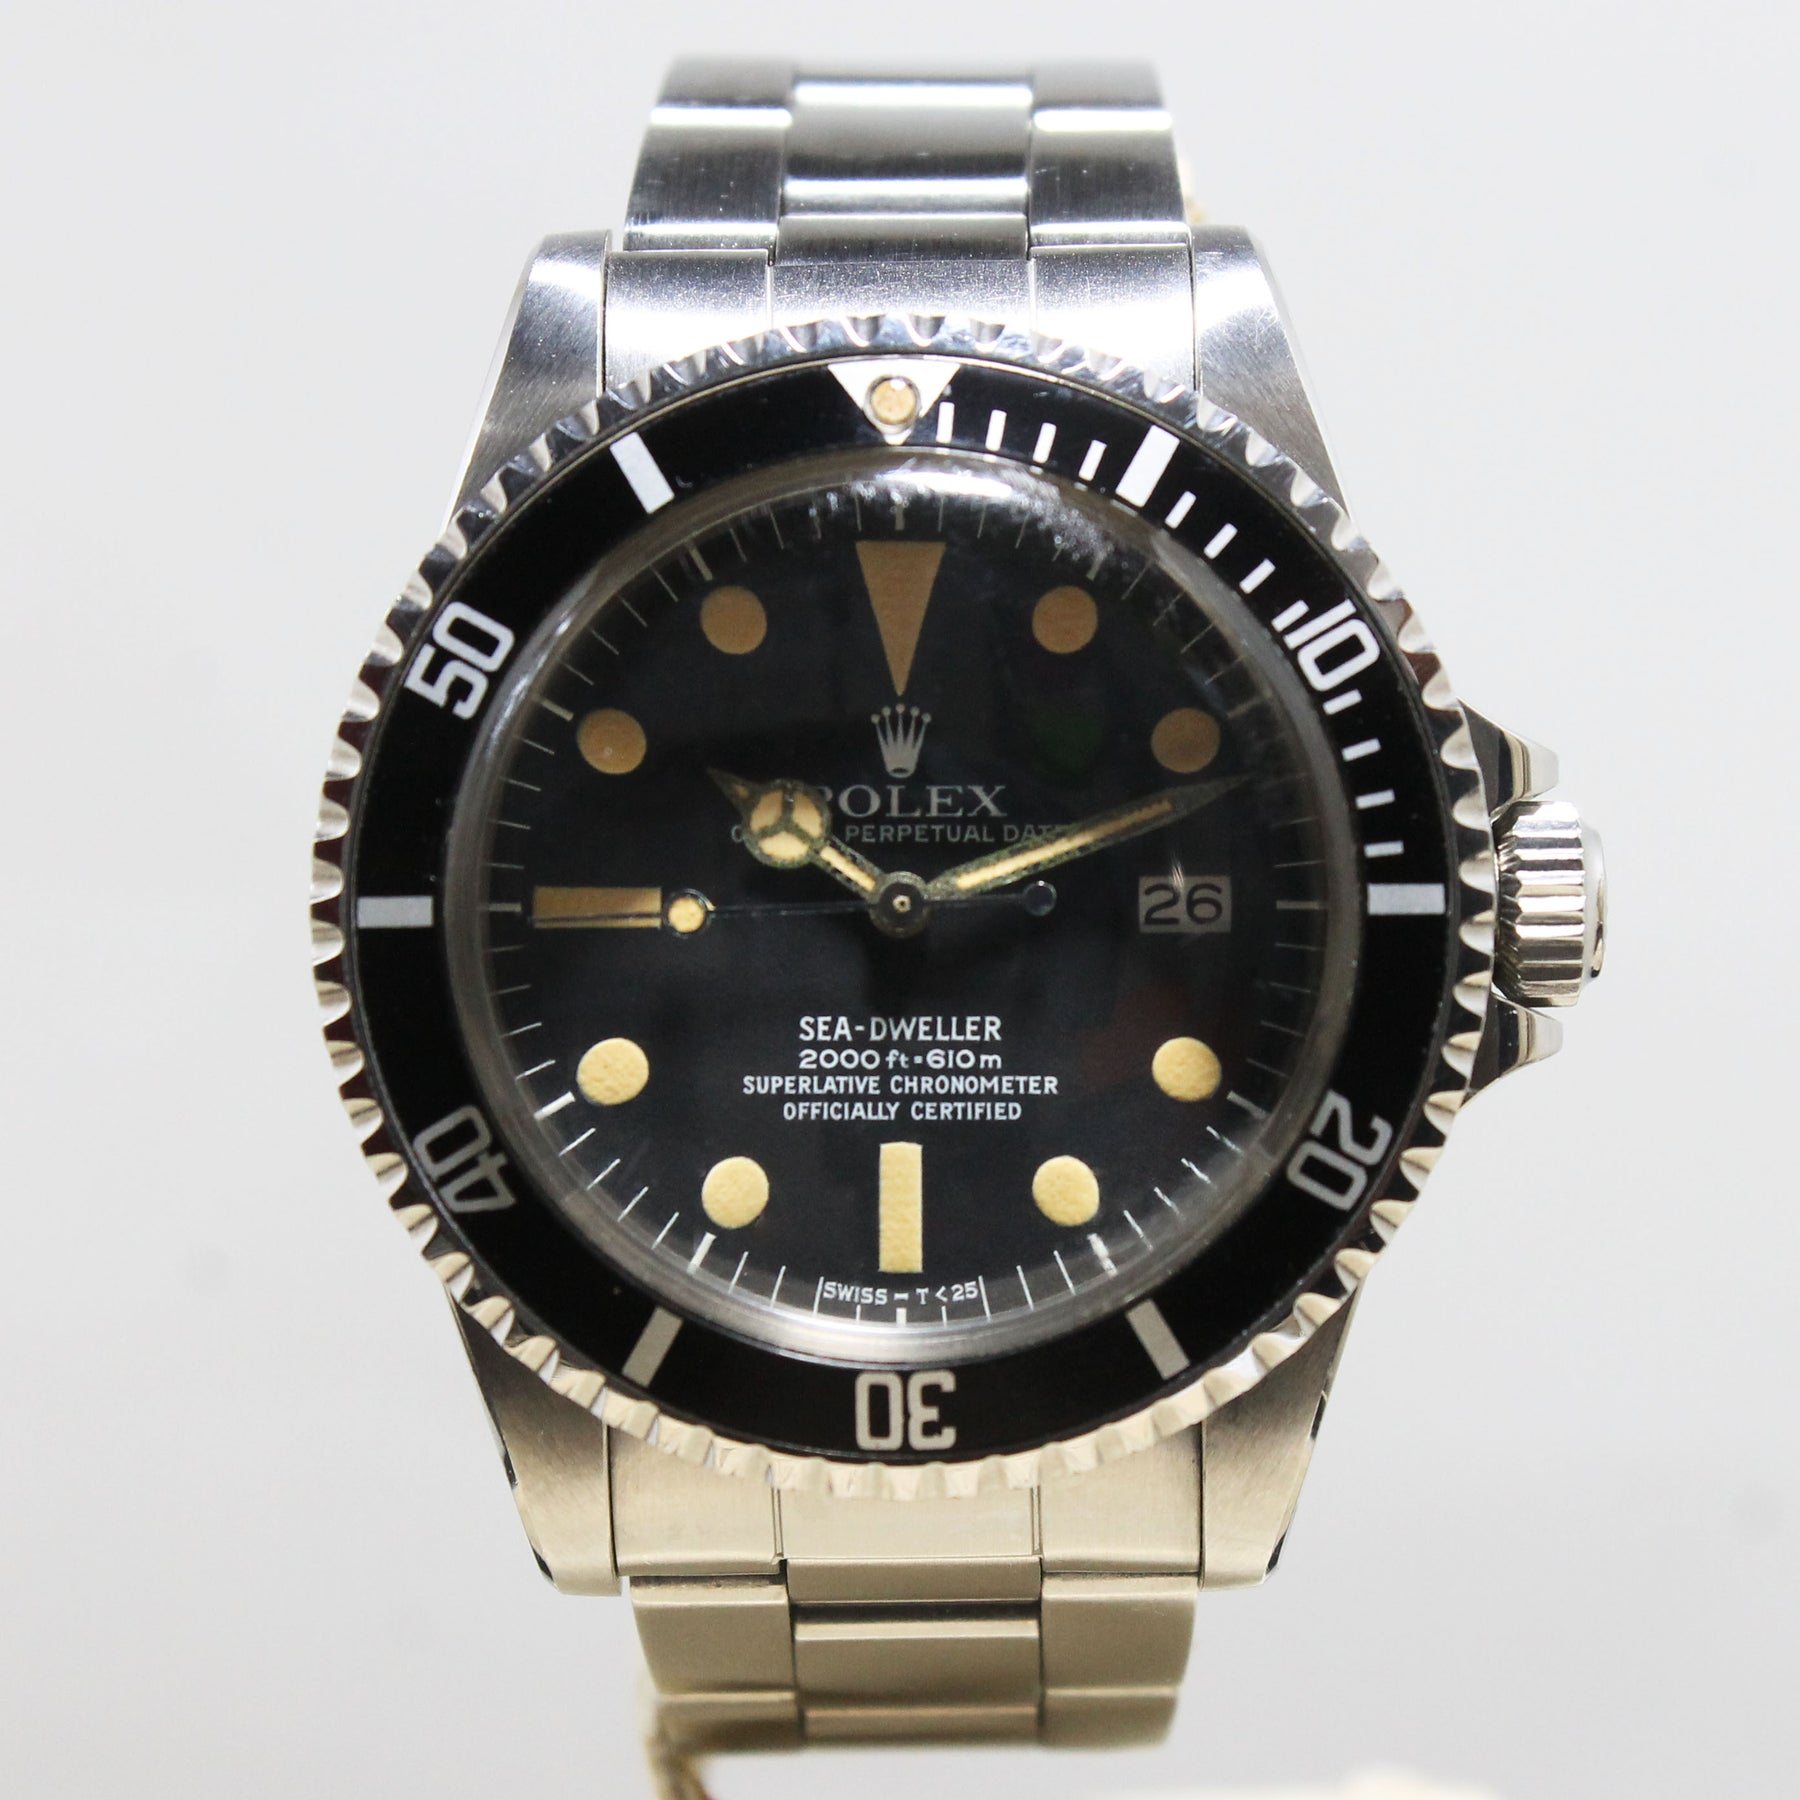 1978 Rolex Sea Dweller Great White Unpolished, like new Ref. 1665 (Full Set with Invoice)